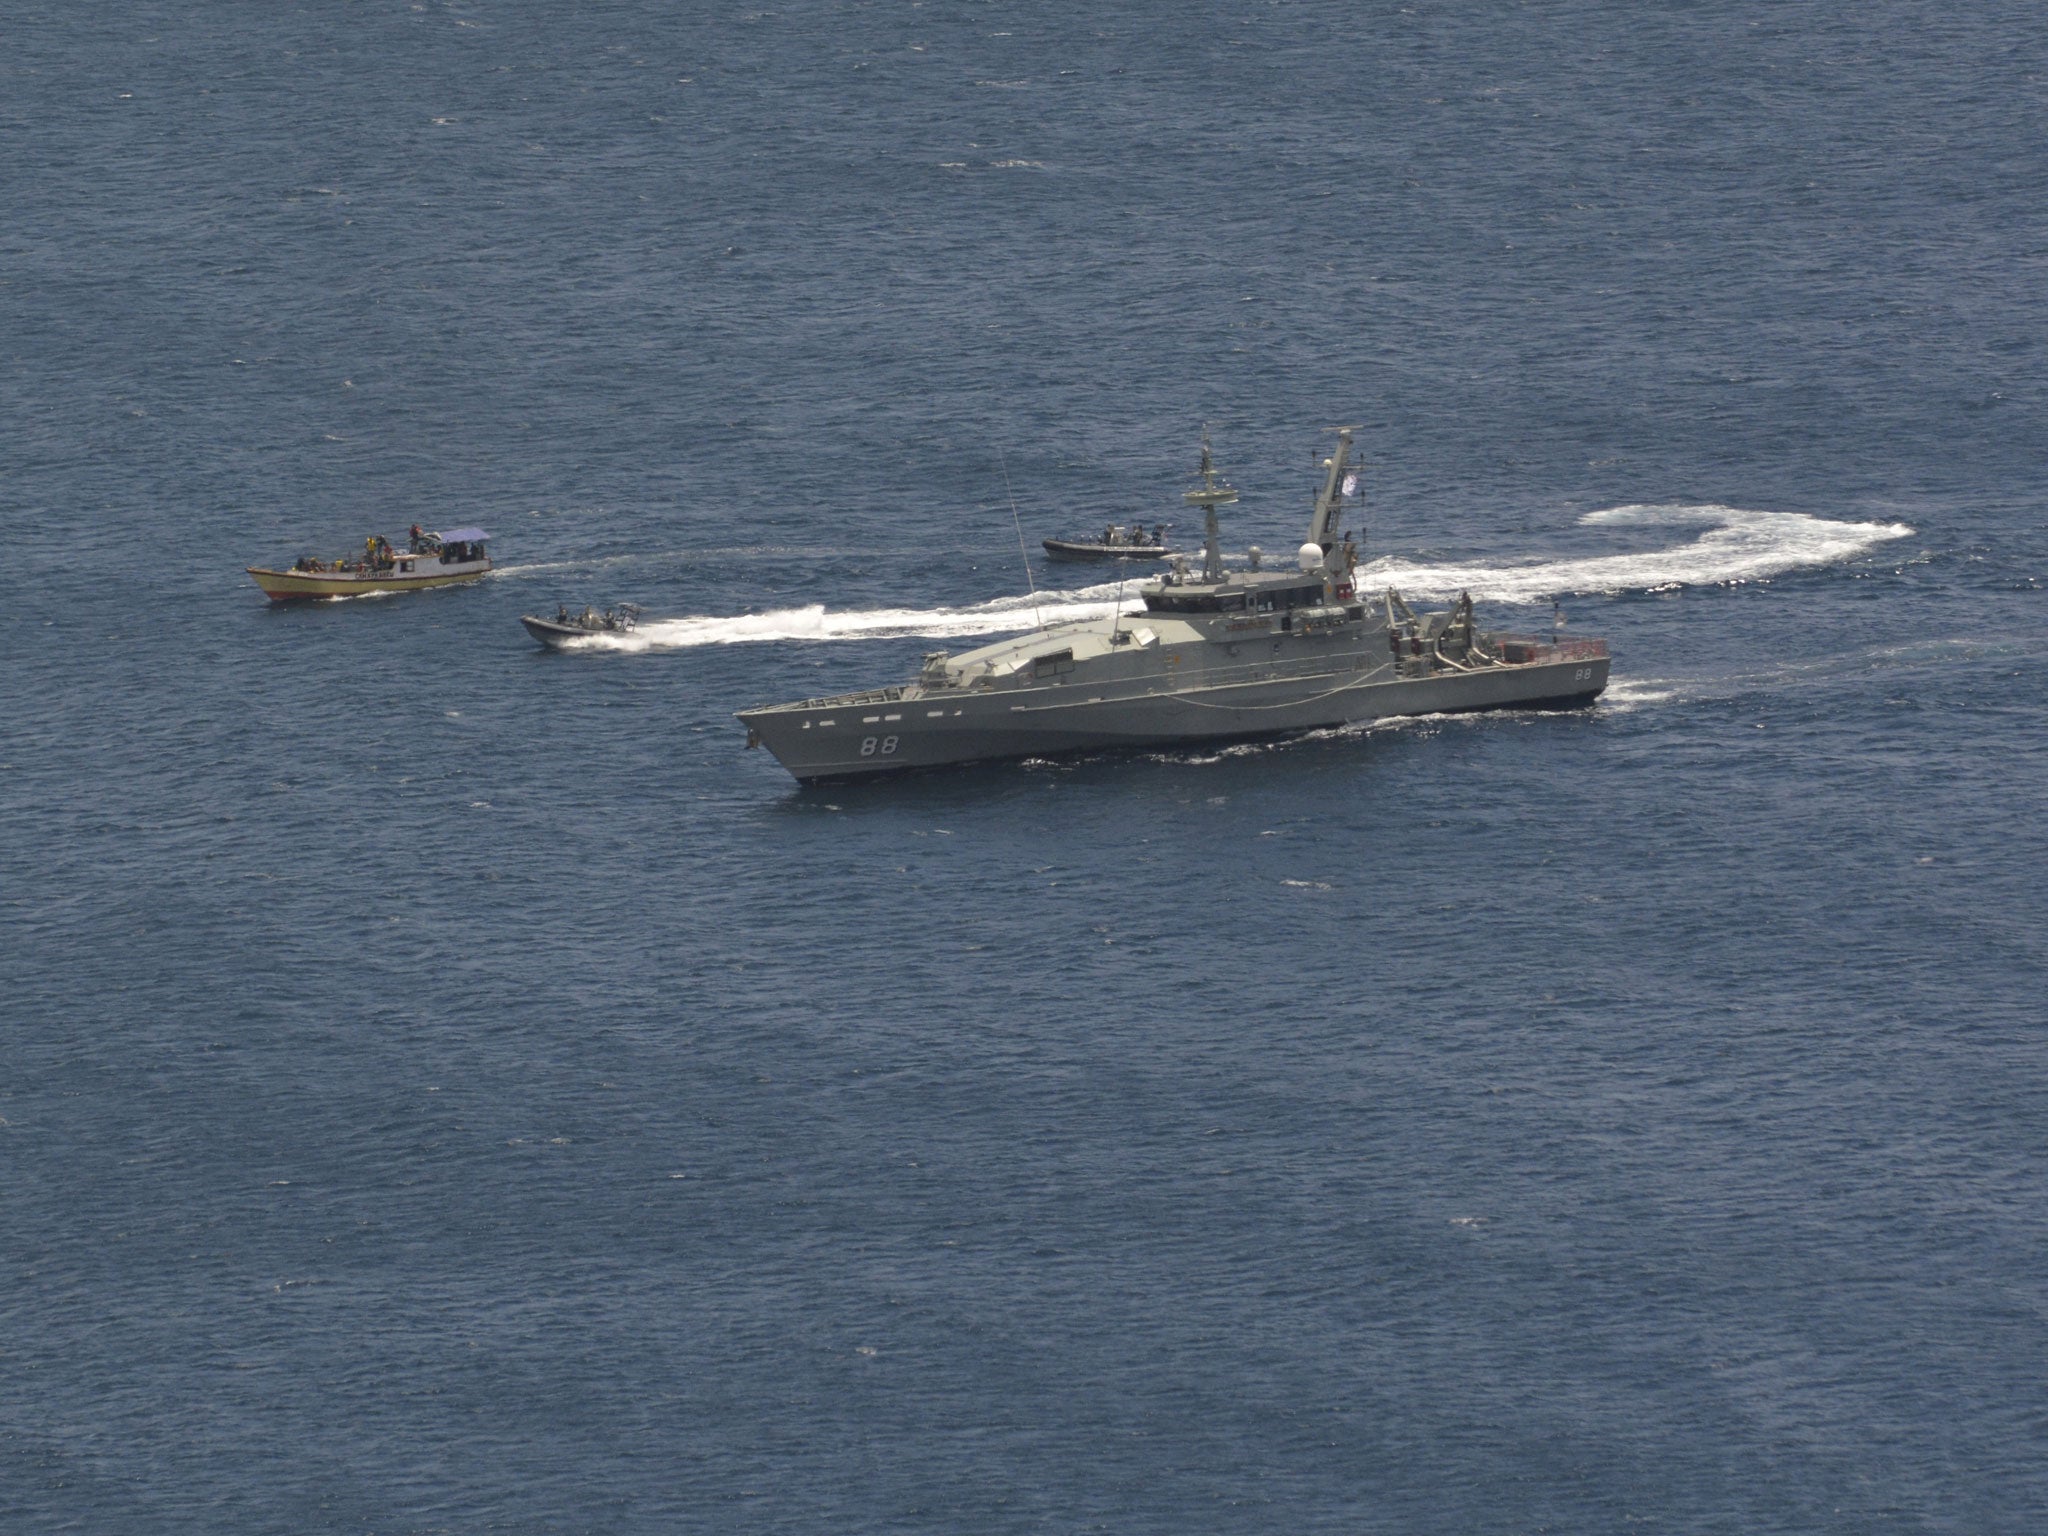 A suspected asylum seeker vessel is intercepted and escorted by the Australian Navy